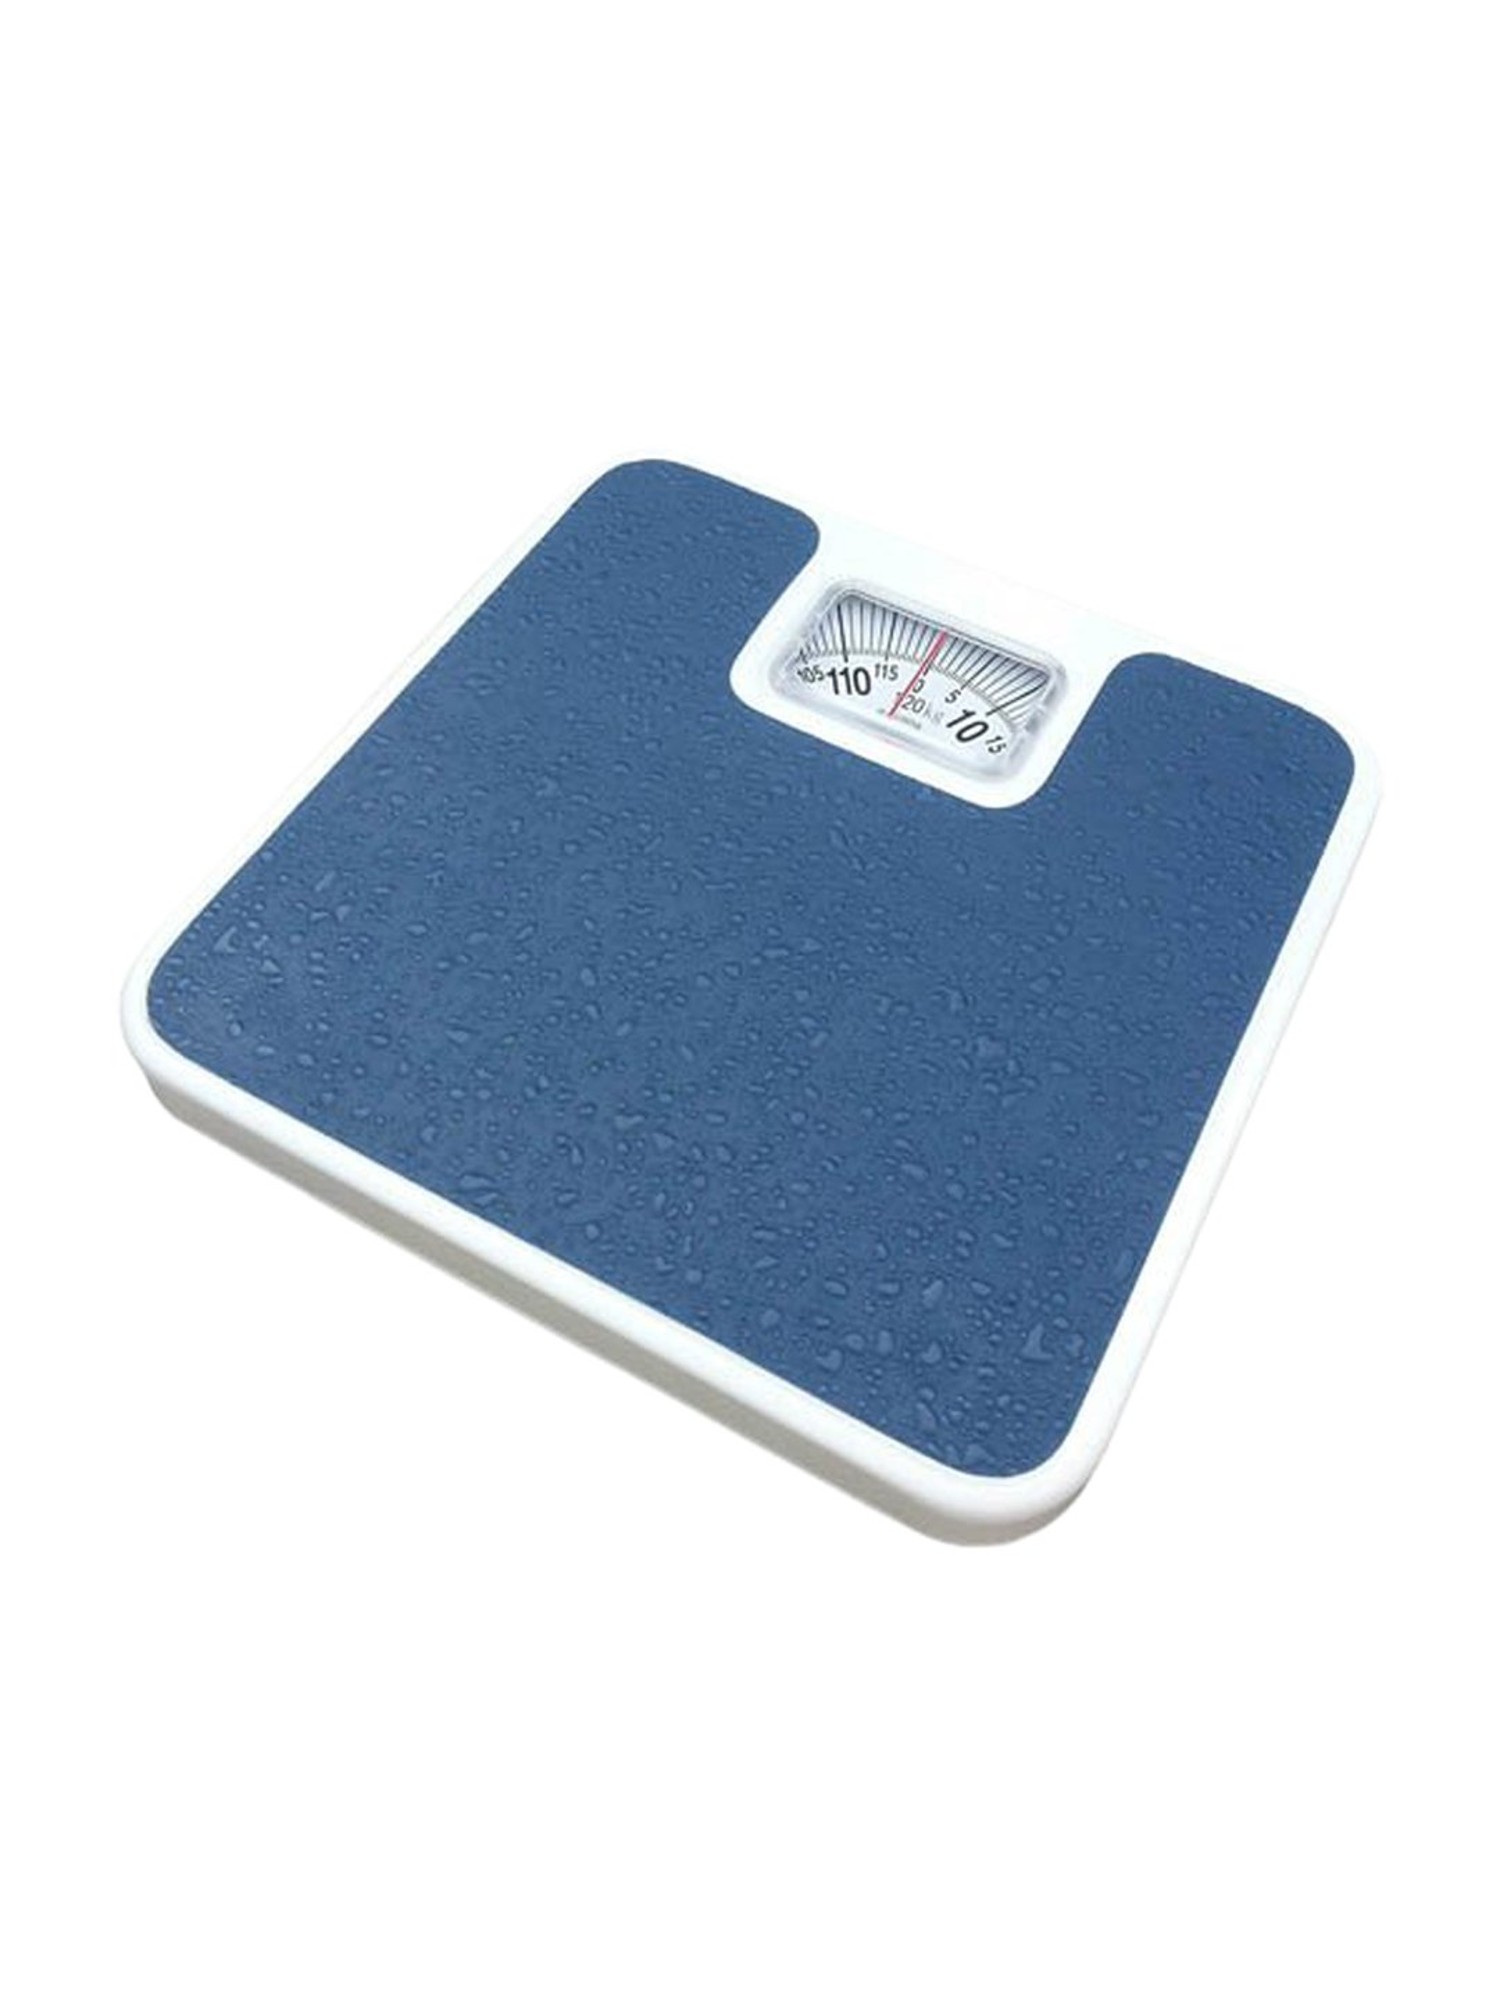 Buy Paxmax Digital Weighing Machine Scale With Front And Back